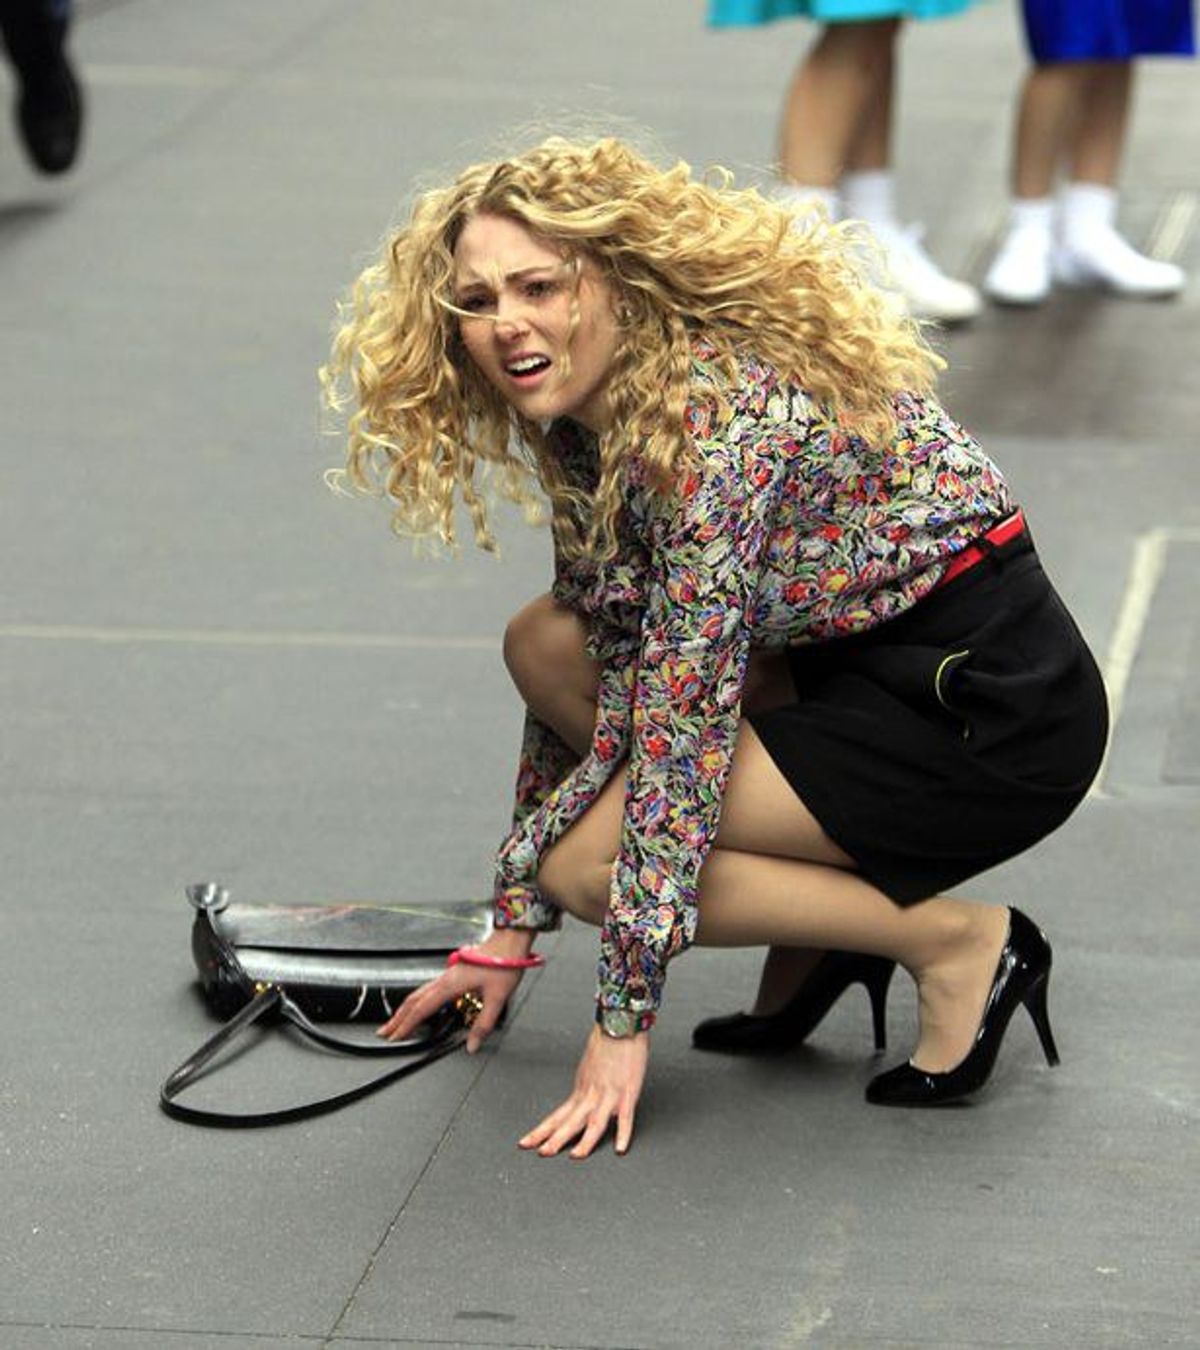 17 Struggles Everyone With Curly Hair Can Relate To